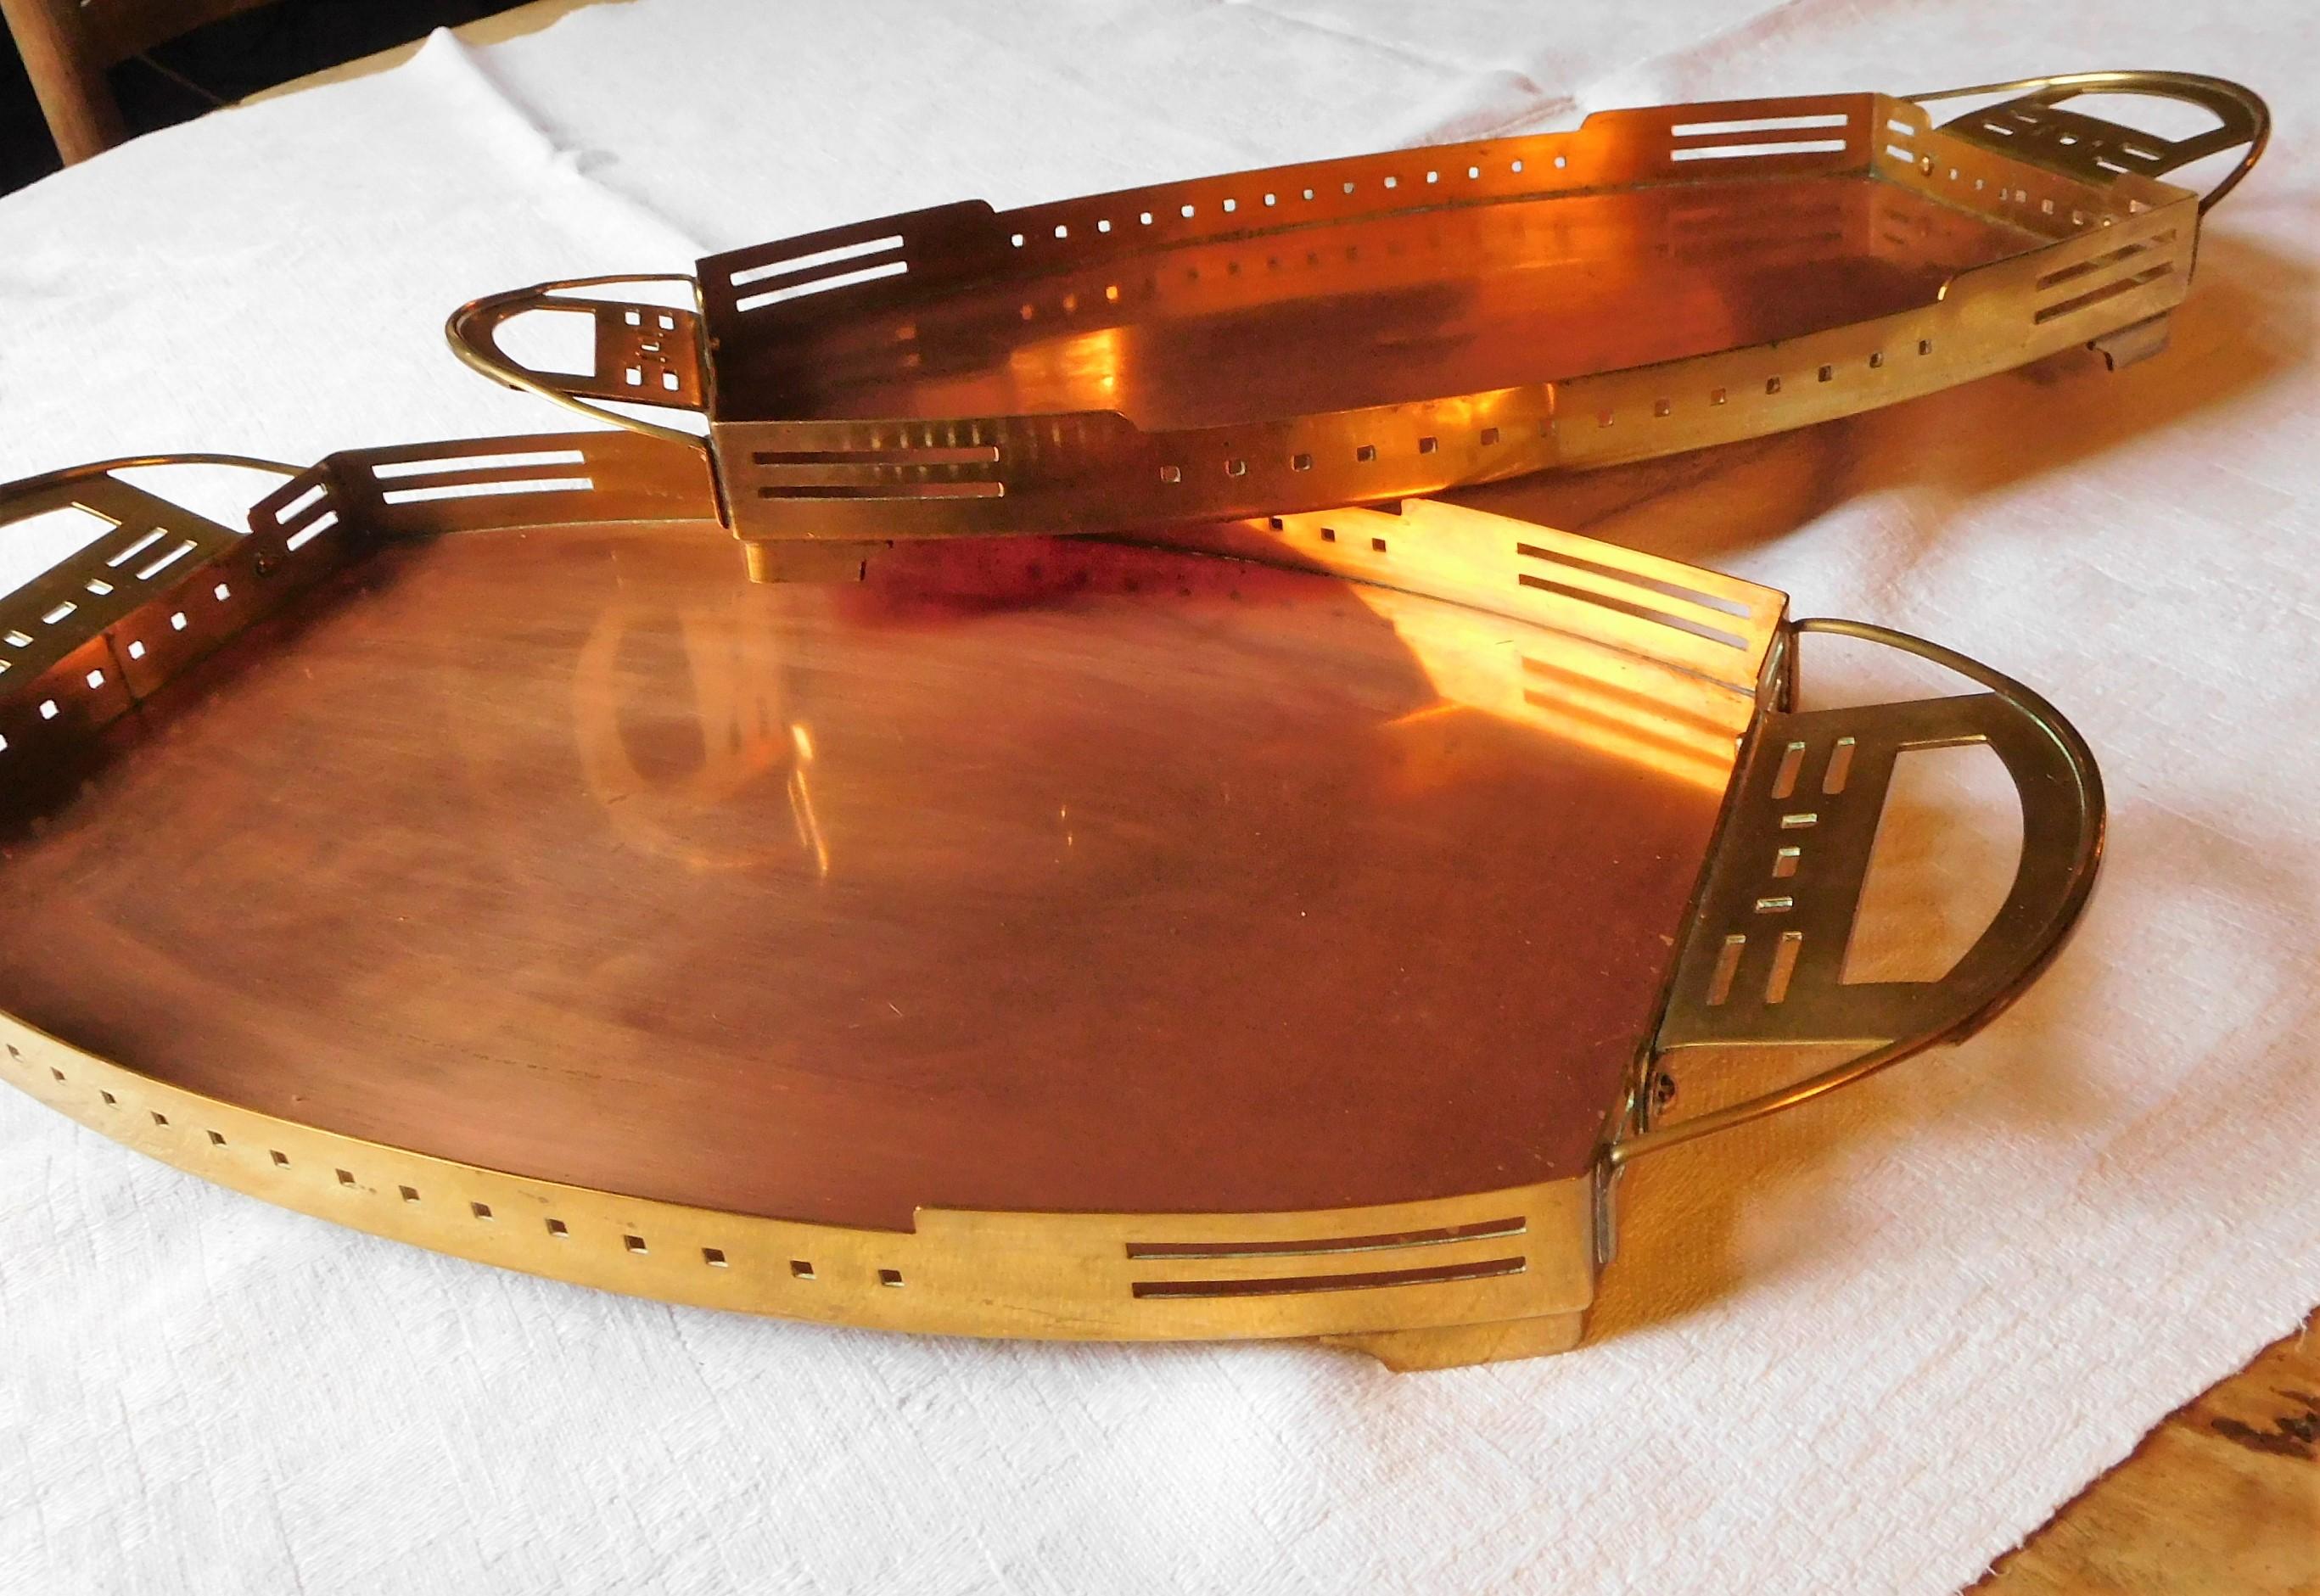 Two Art Nouveau serving-tray's from the Belgian architect and designer Gustave Serrurier-Bovy ( 1858-1910 ).
Very good condition, copper and brass.